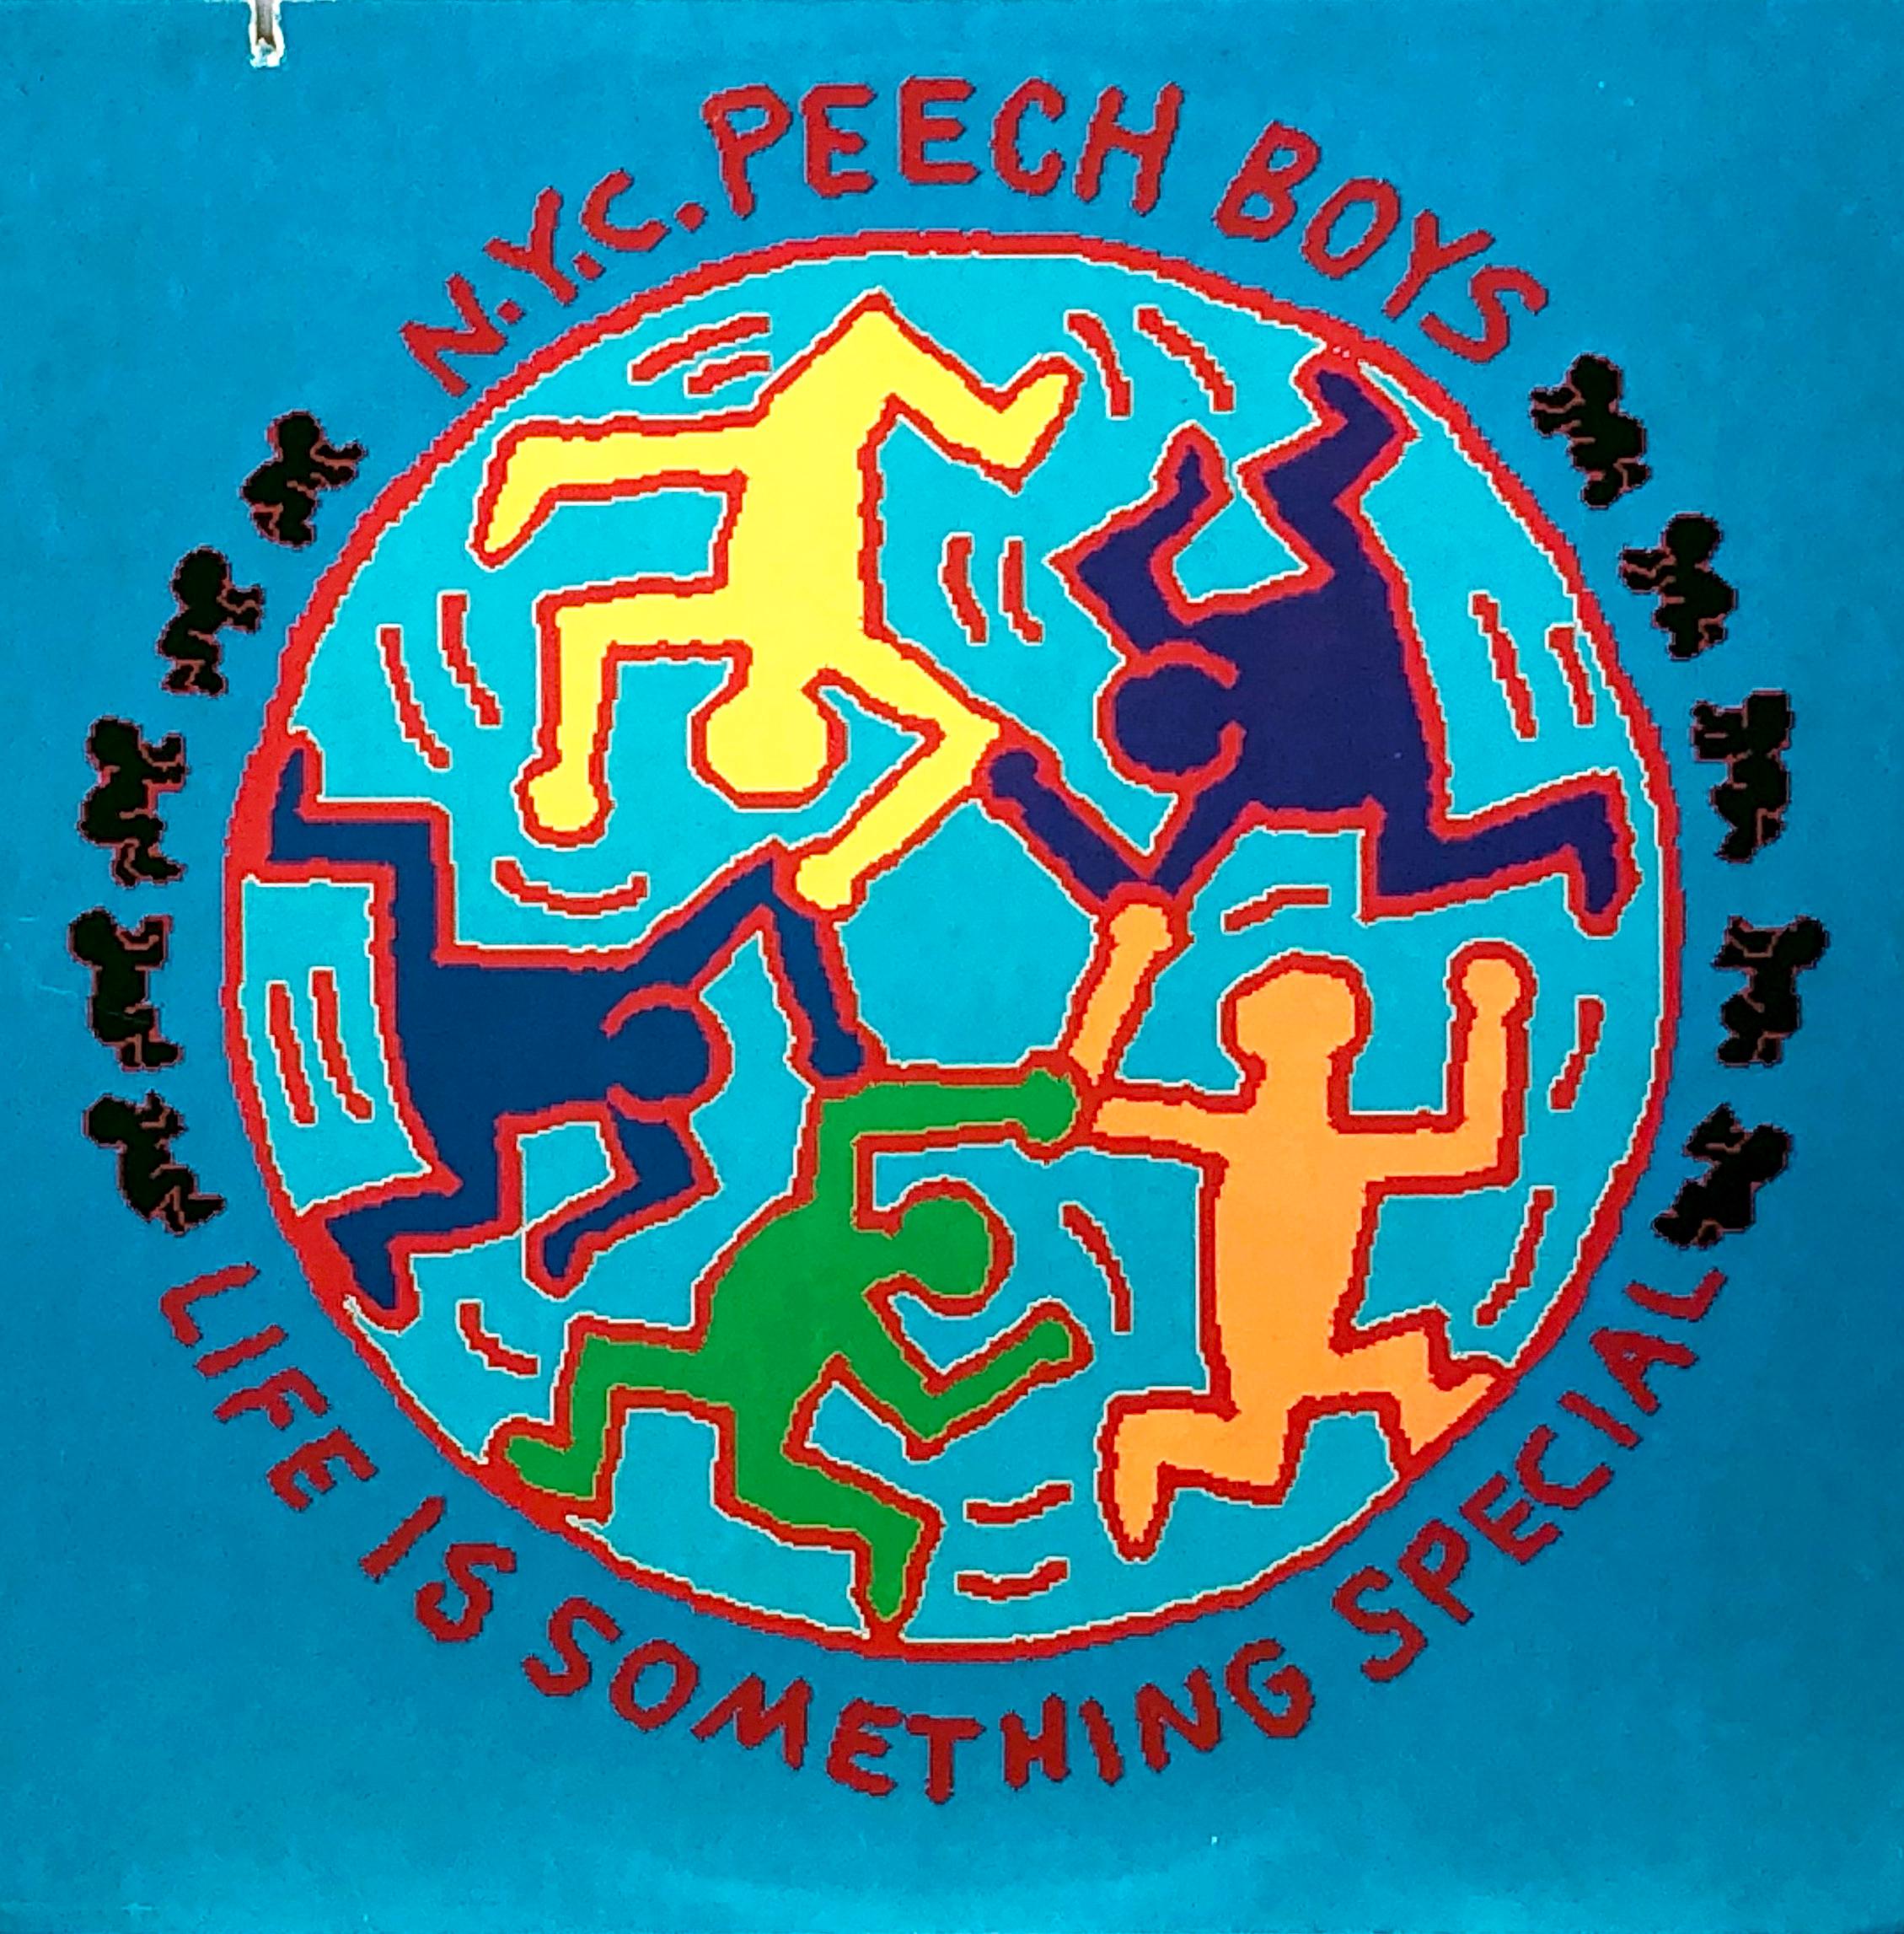 Vintage Vinyl Record Art by Keith Haring with vivid colors that make for stand-out wall art within reach.

Year: 1983
Off-Set Lithograph on record jacket, vinyl record. 
Dimensions: 12 x 12 inches. 
Cover: Bright, crisp colors; very good to